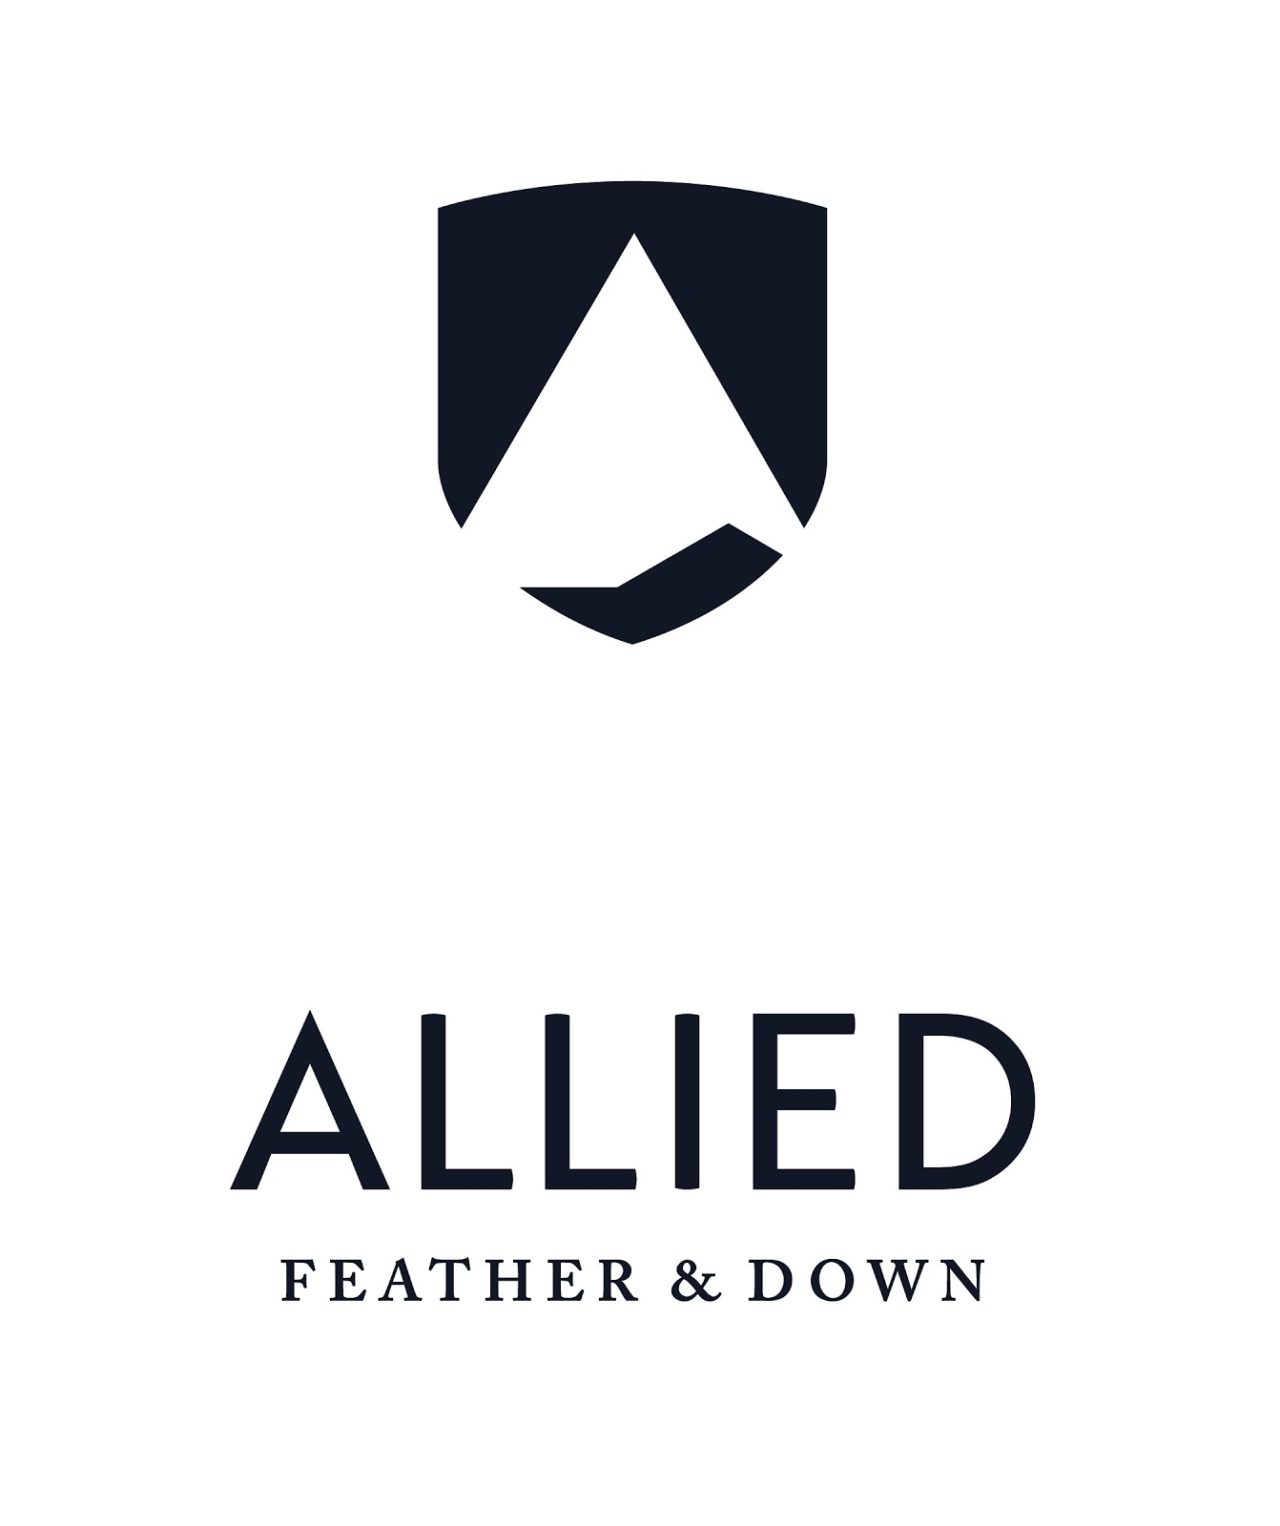 ALLIED Feather & Down Welcomes 100th Partner Brand into Industry-First, ISPO Gold-Winning, TrackMyDown.com Traceability Platform